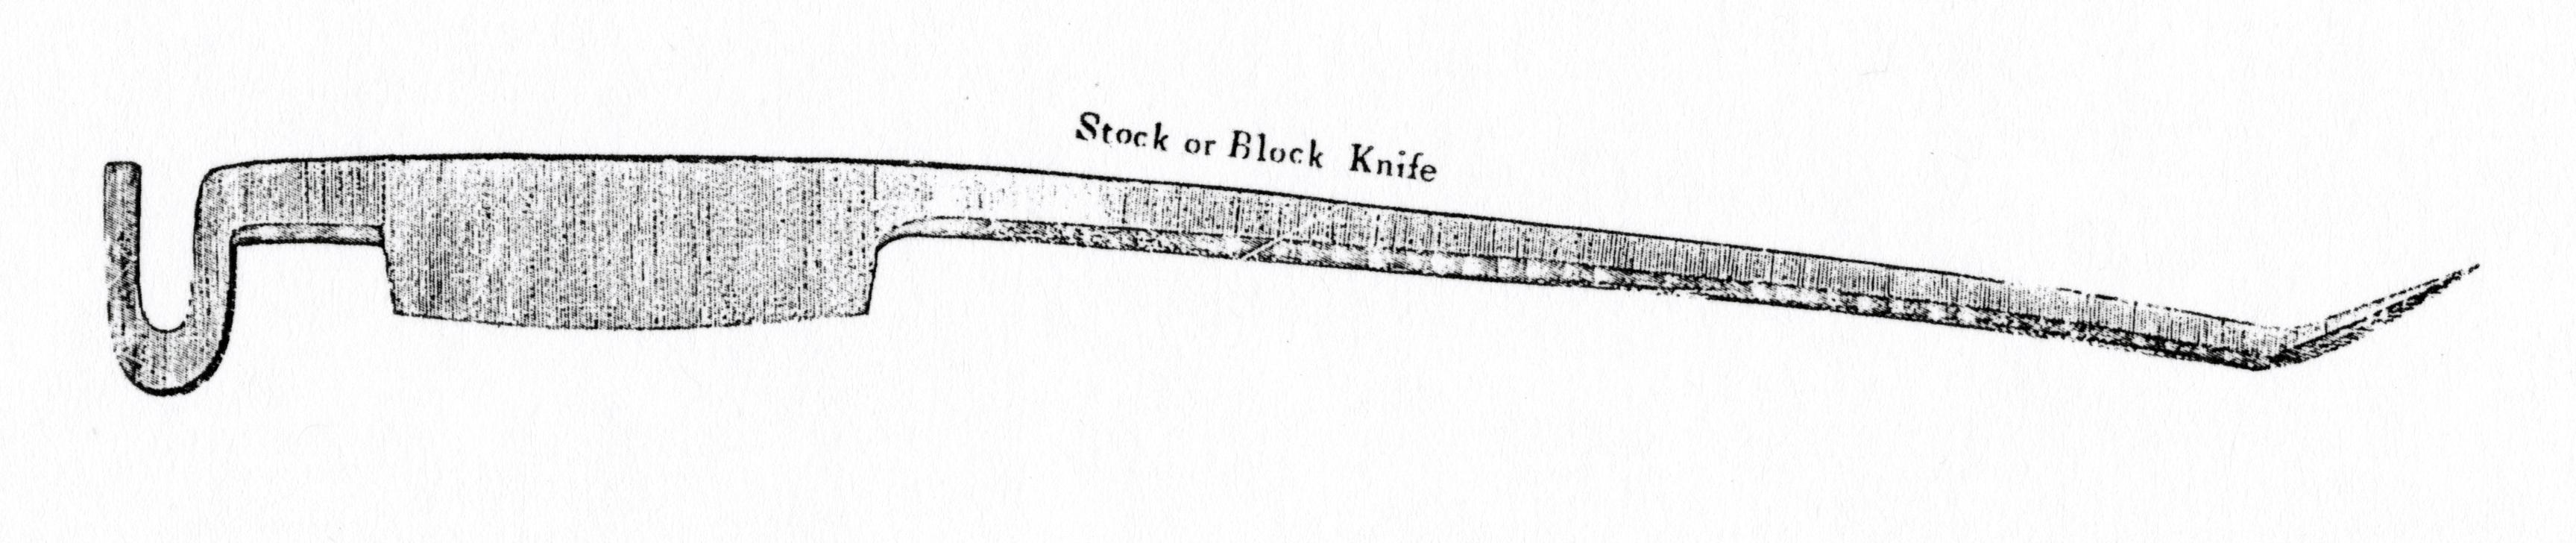 Black and white illustration of a stock or block knife.